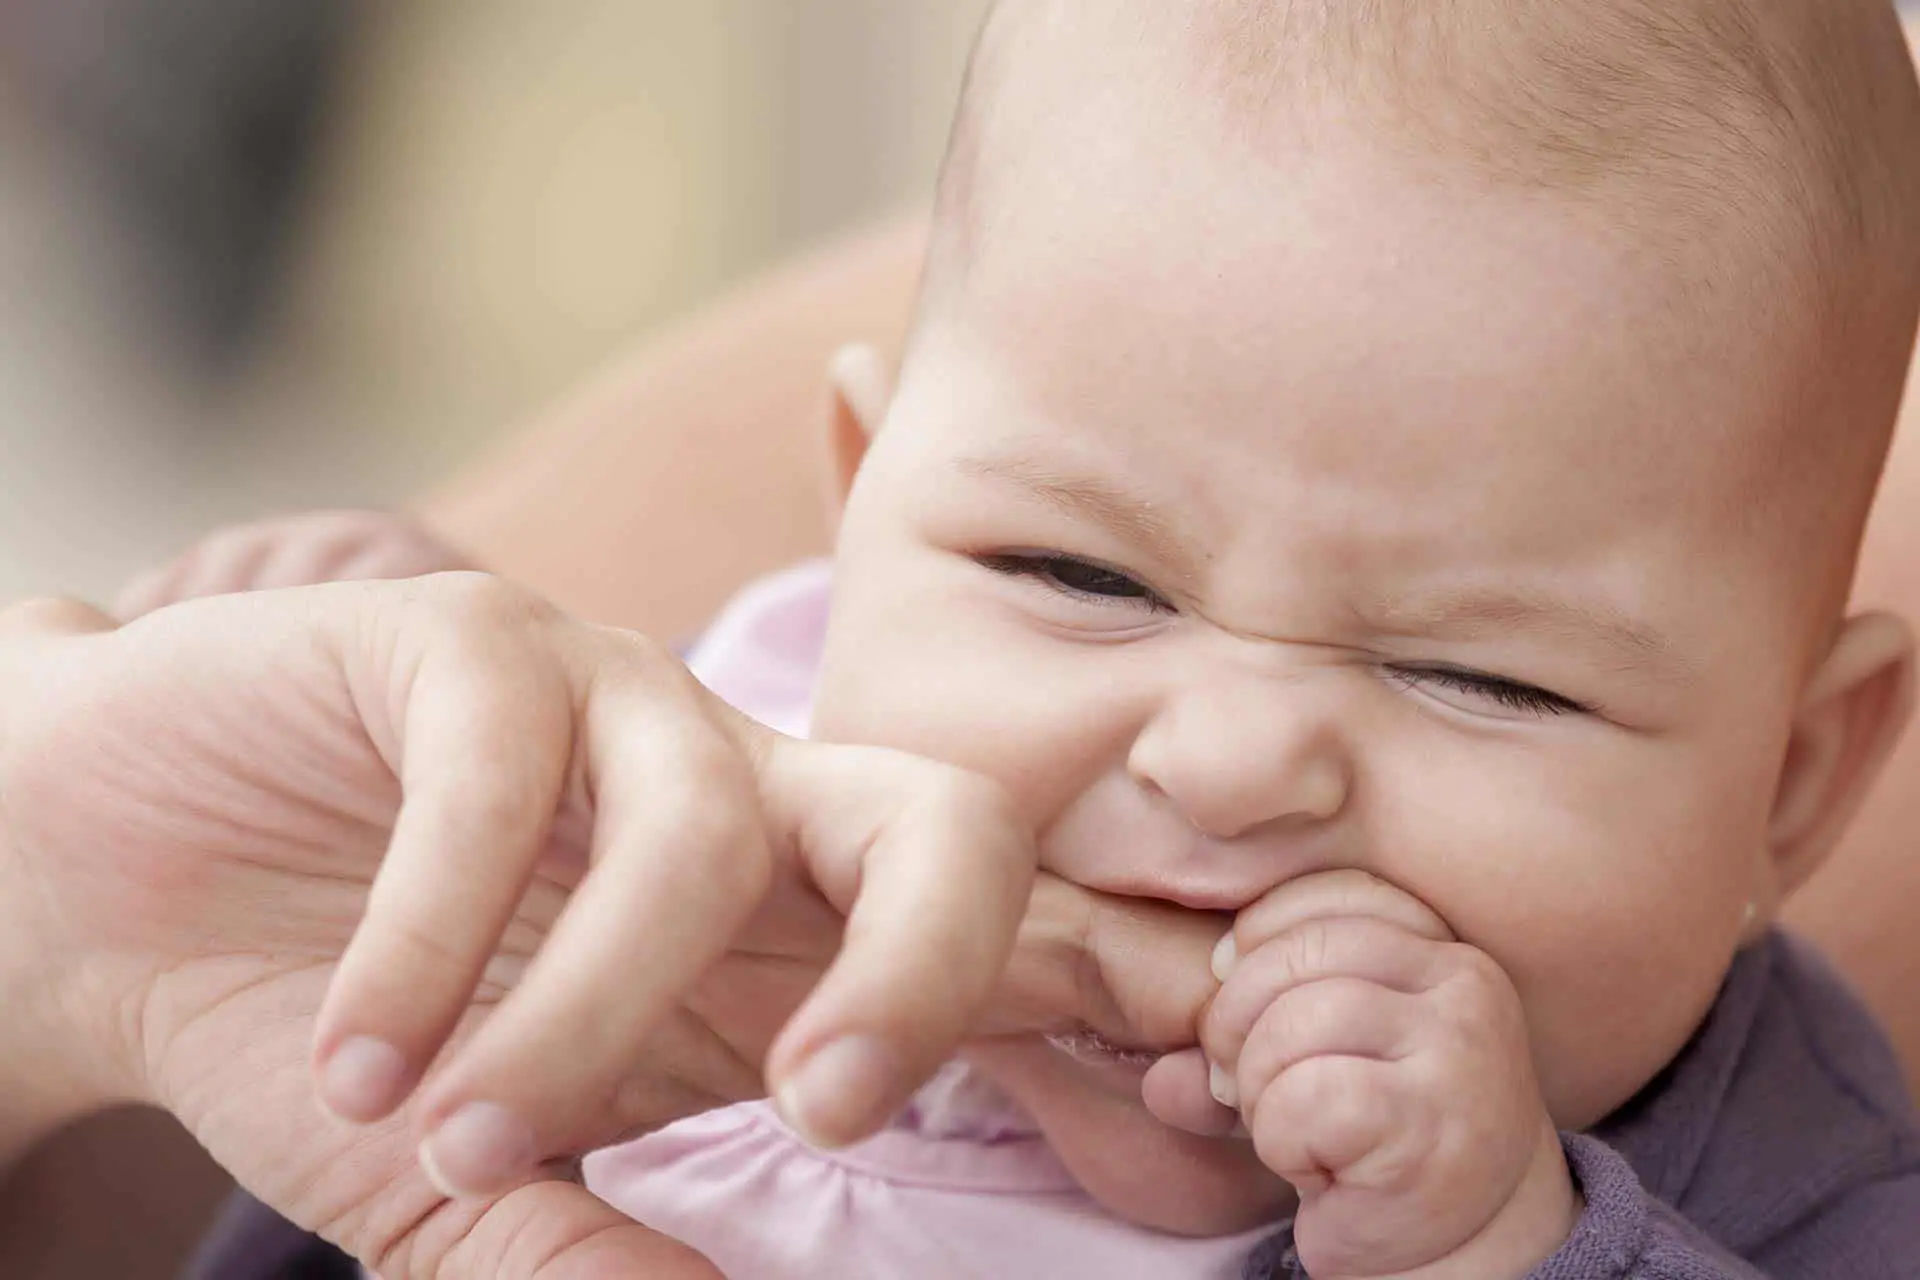 Signs Your Toddler is Teething